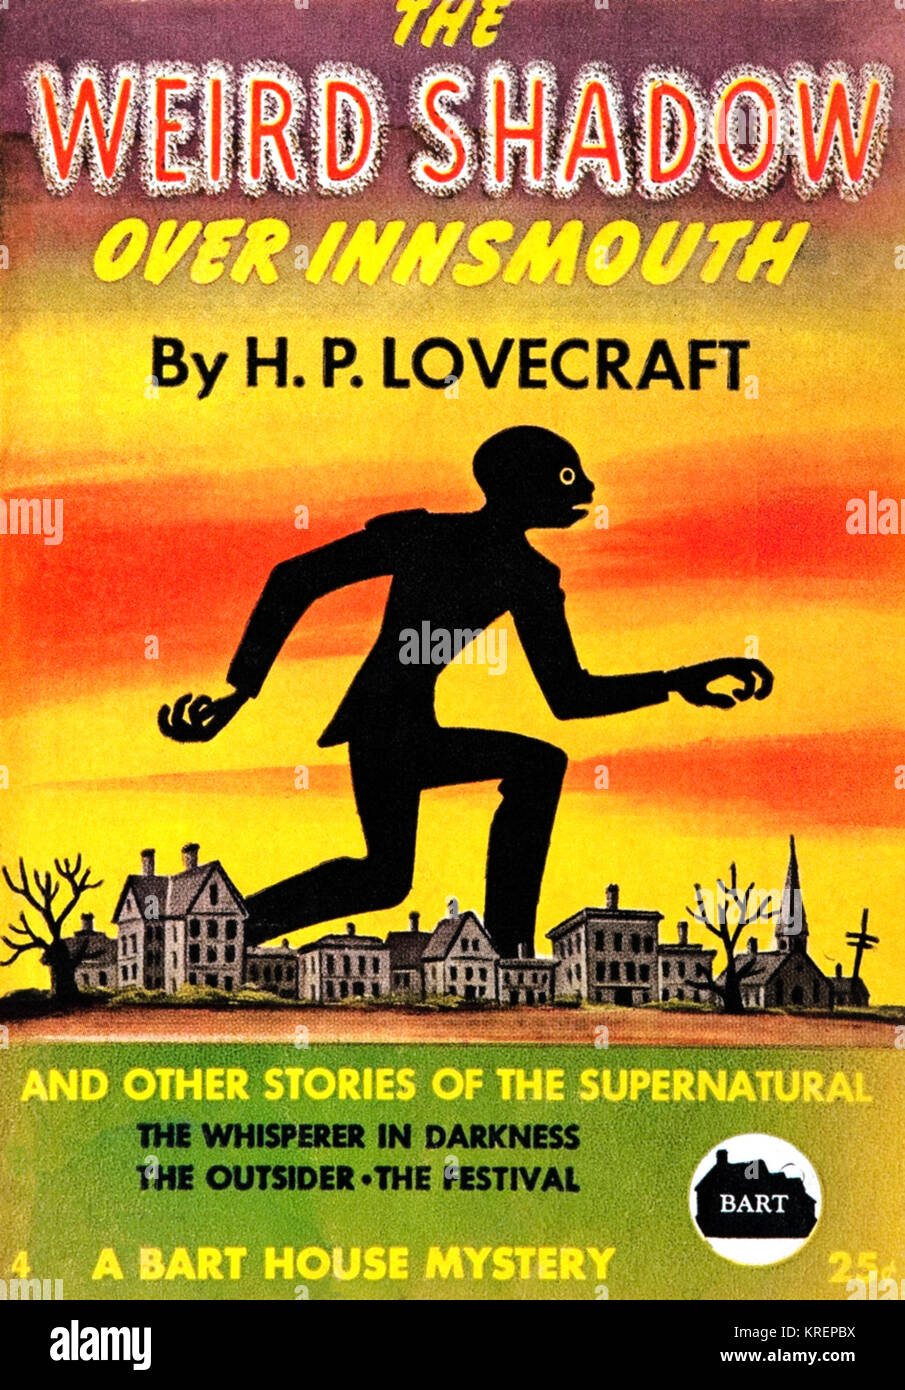 'Original cover art of ''The Weird Shadows Over Innsmouth''  It is a an anthology of Cthulhu Mythos stories by author H. P. Lovecraft and was released in 1944 .  Howard Phillips Lovecraft (August 20, 1890 ? March 15, 1937), known as H. P. Lovecraft, was an American author who achieved posthumous fame through his influential works of horror fiction.  Virgil Finlay (July 23, 1914 ? January 18, 1971) was an American pulp fantasy, science fiction and horror illustrator.' Stock Photo